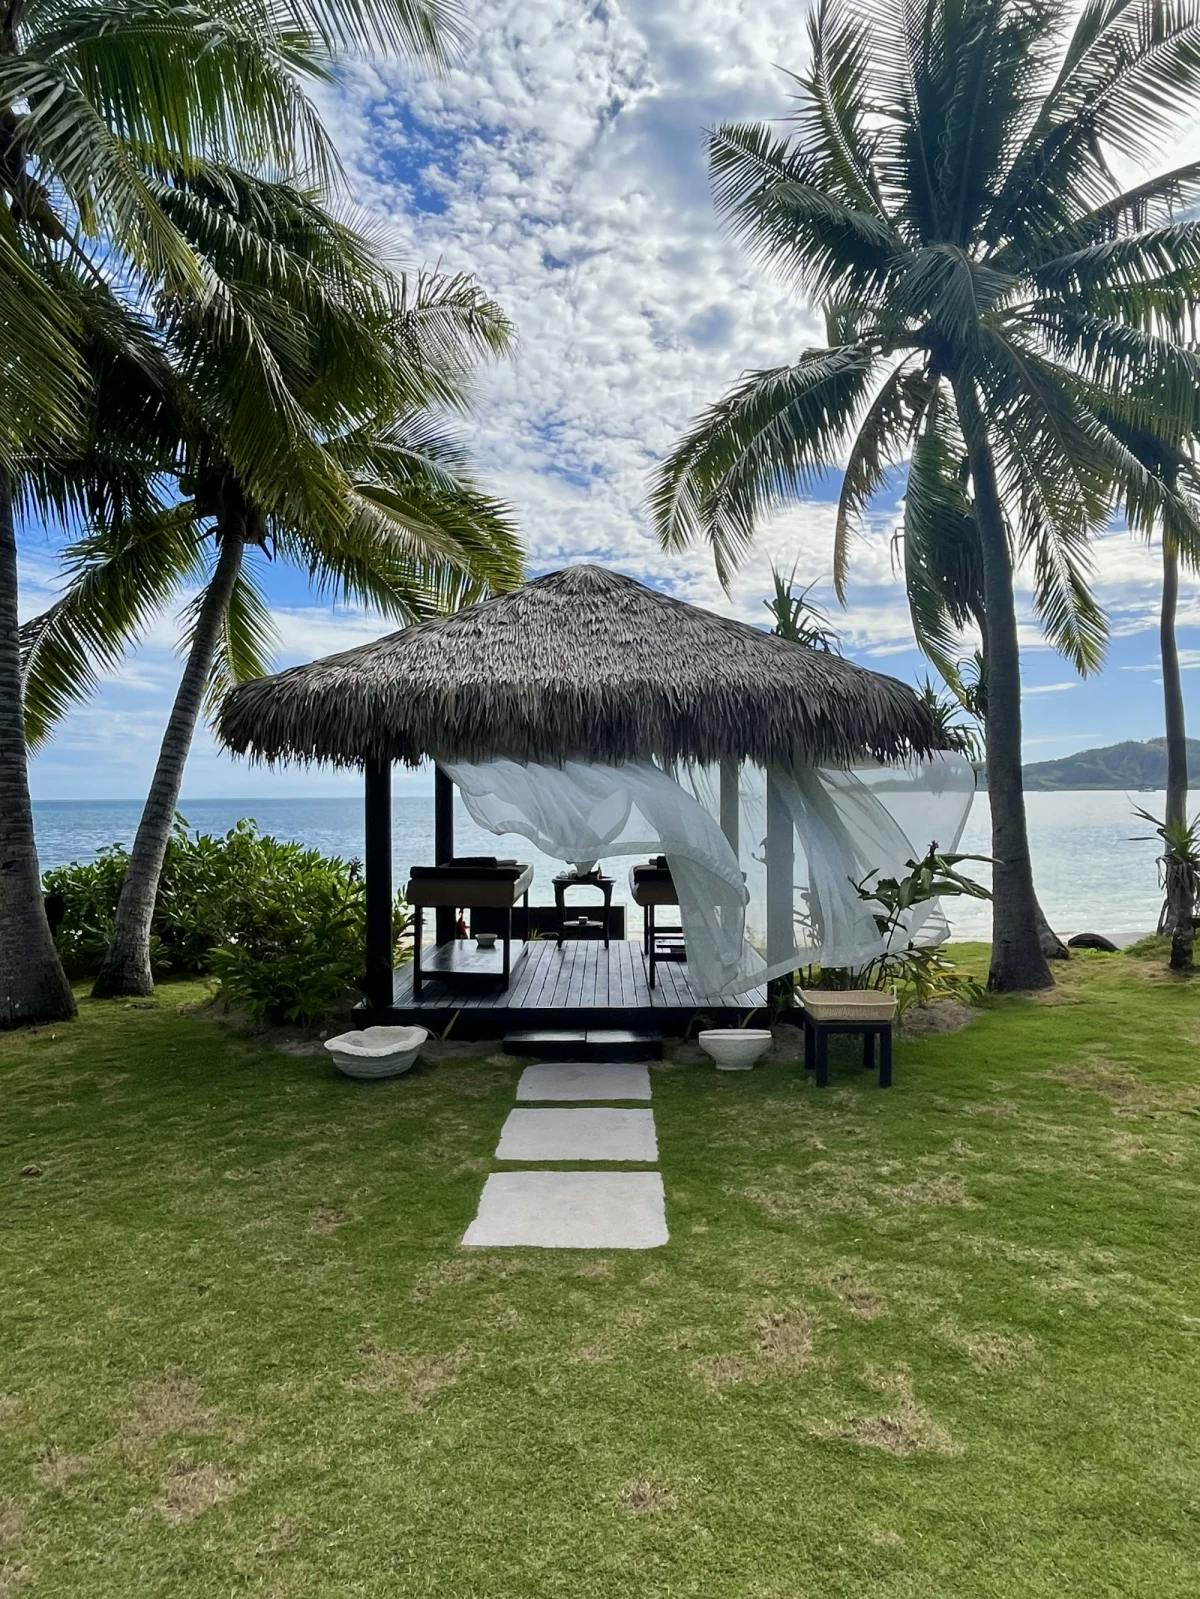 A private beachfront massage bure, a thatched hut with gauzy curtains overlooking the ocean, with palm trees on either side